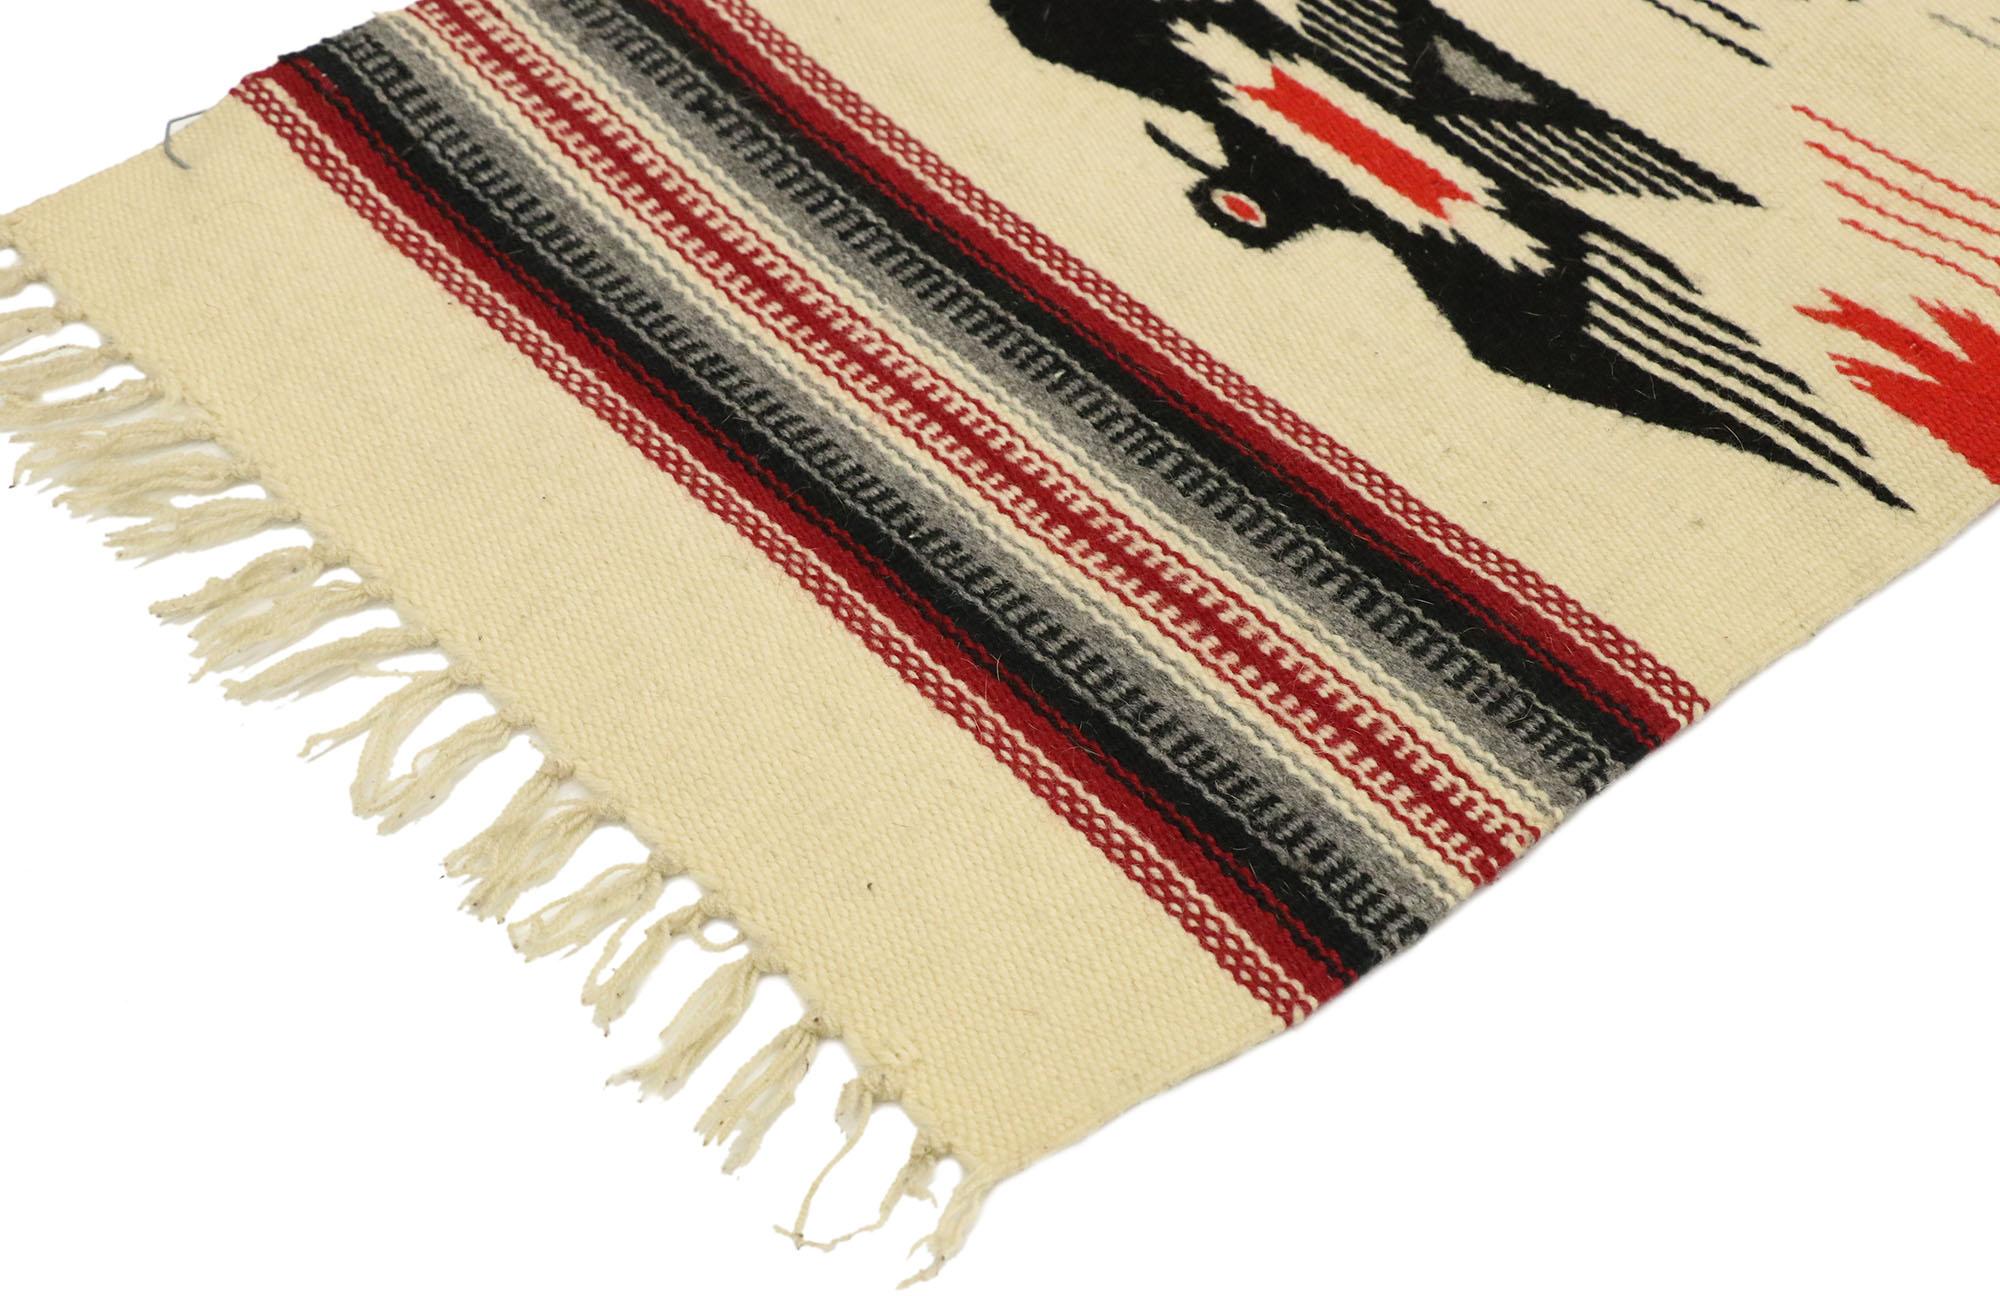 77488 vintage Mexican throw blanket Kilim accent rug with Navajo two grey hills style. With its bold expressive design, incredible detail and texture, this hand-woven wool vintage Mexican throw blanket kilim accent rug is a captivating vision of